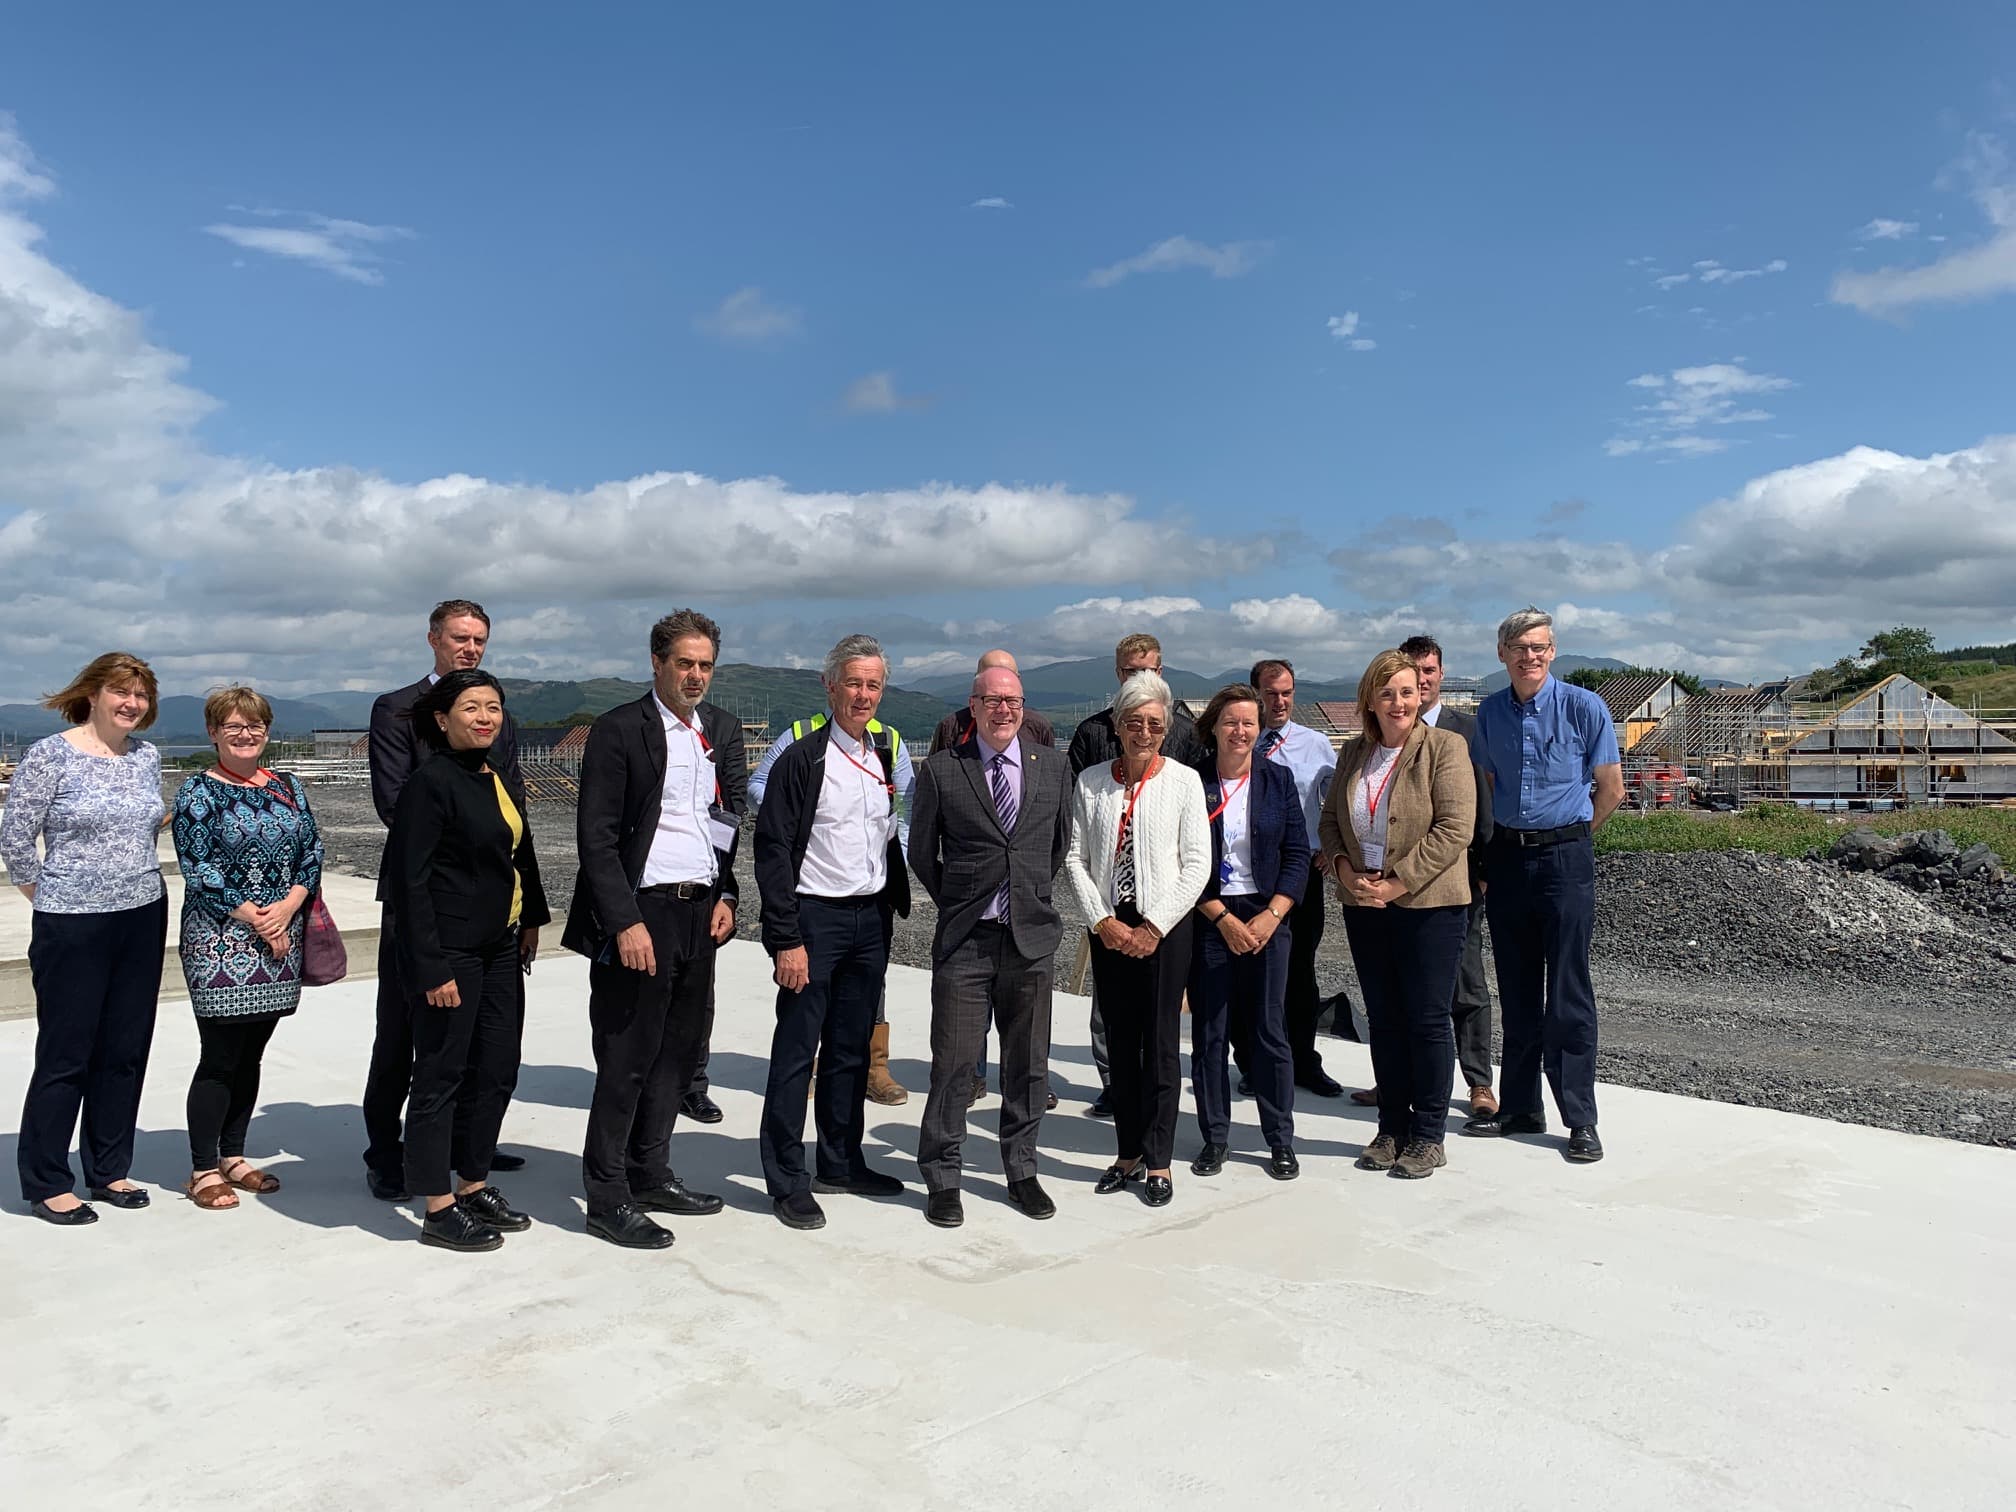 A group of people stand on a concrete foundation on a building site with the sea, hills and blue skies visible behind